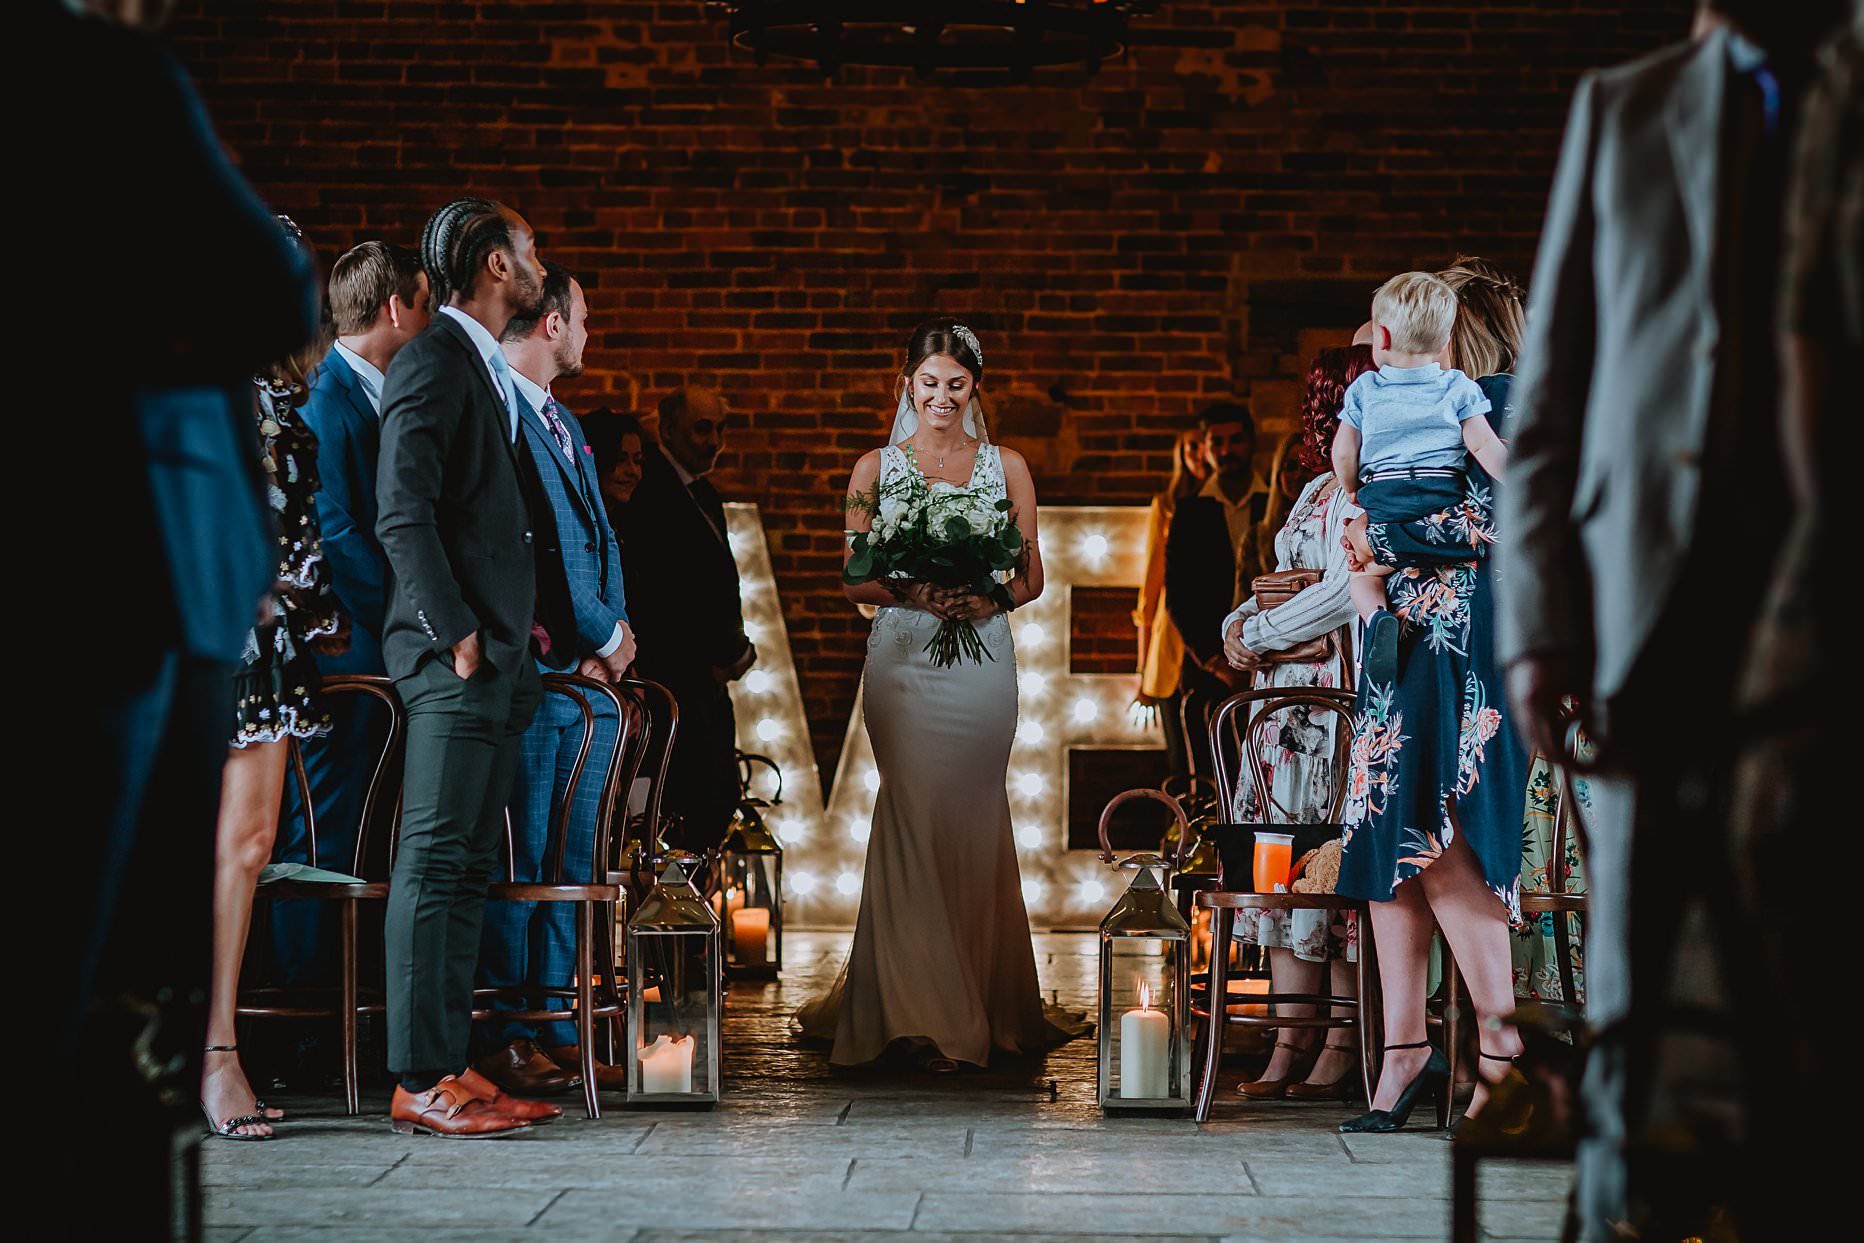 Bride walking down the aisle on her own at Hazel Gap Barn. She is holding a bouquet and guests are stood up either side of her watching her walk.